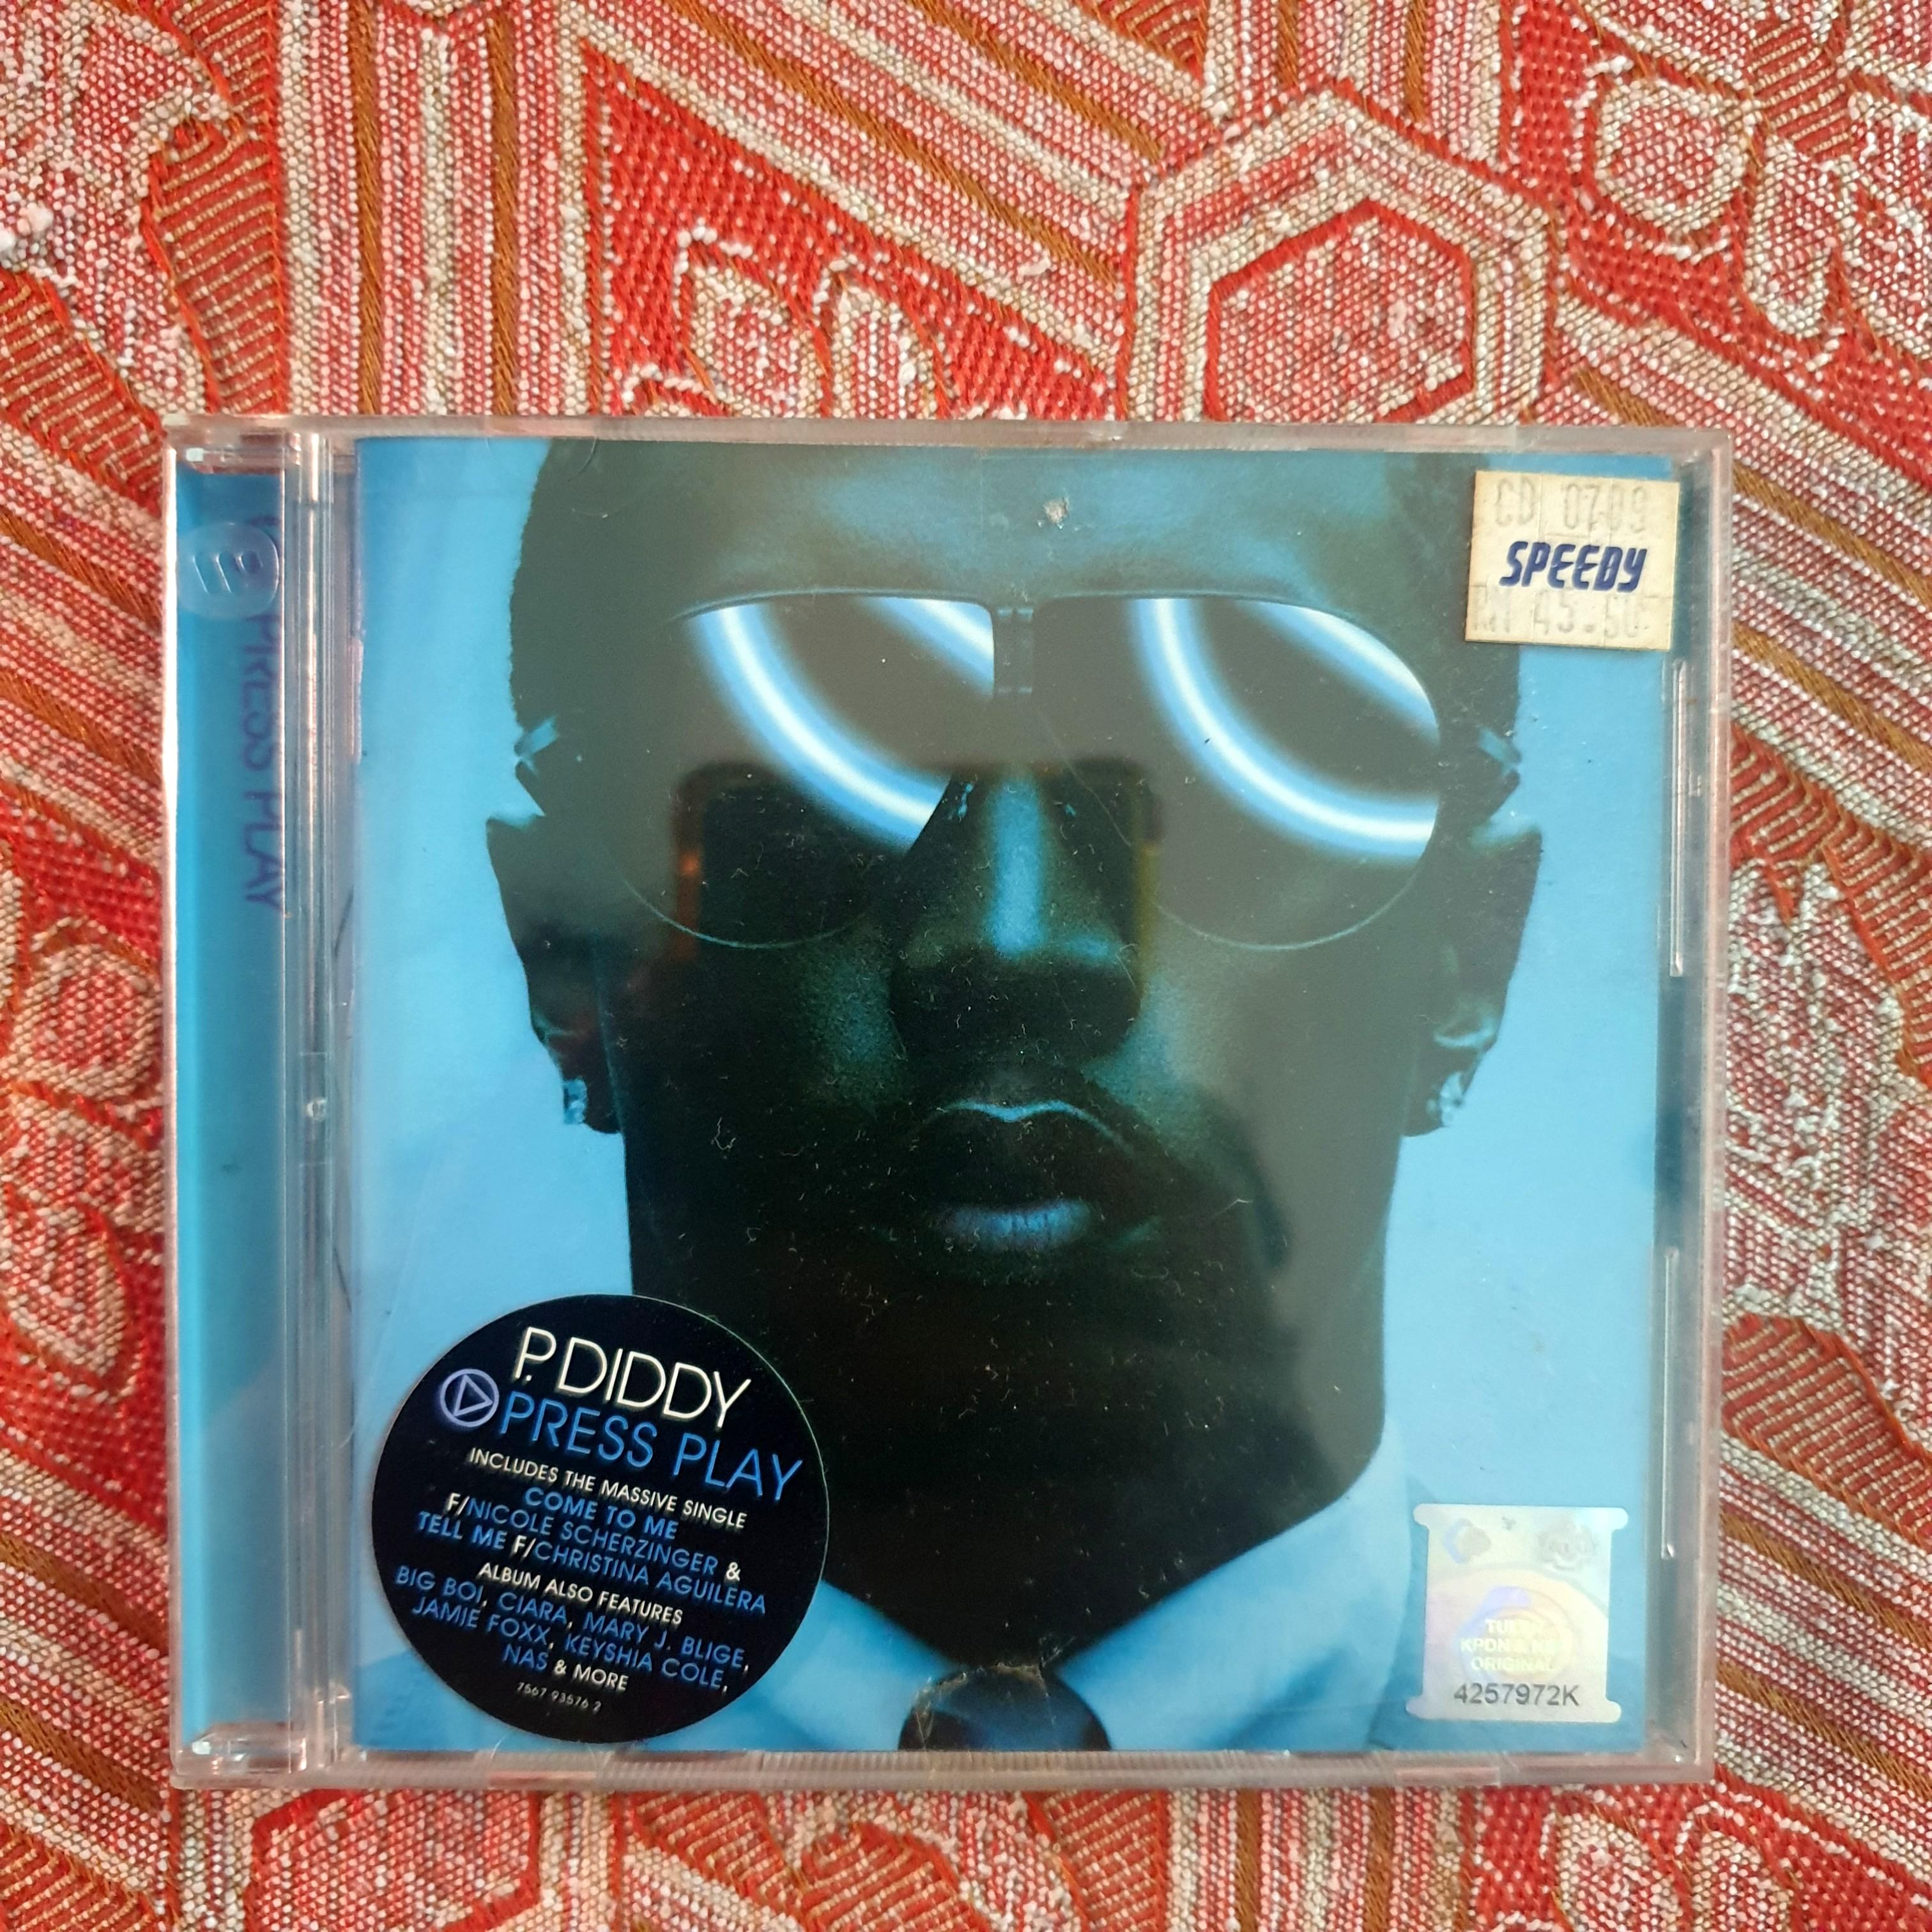 Puff Daddy / Puff Diddy / P. Diddy Press Play - Sealed Japanese Promo CD  album (CDLP) (541888)